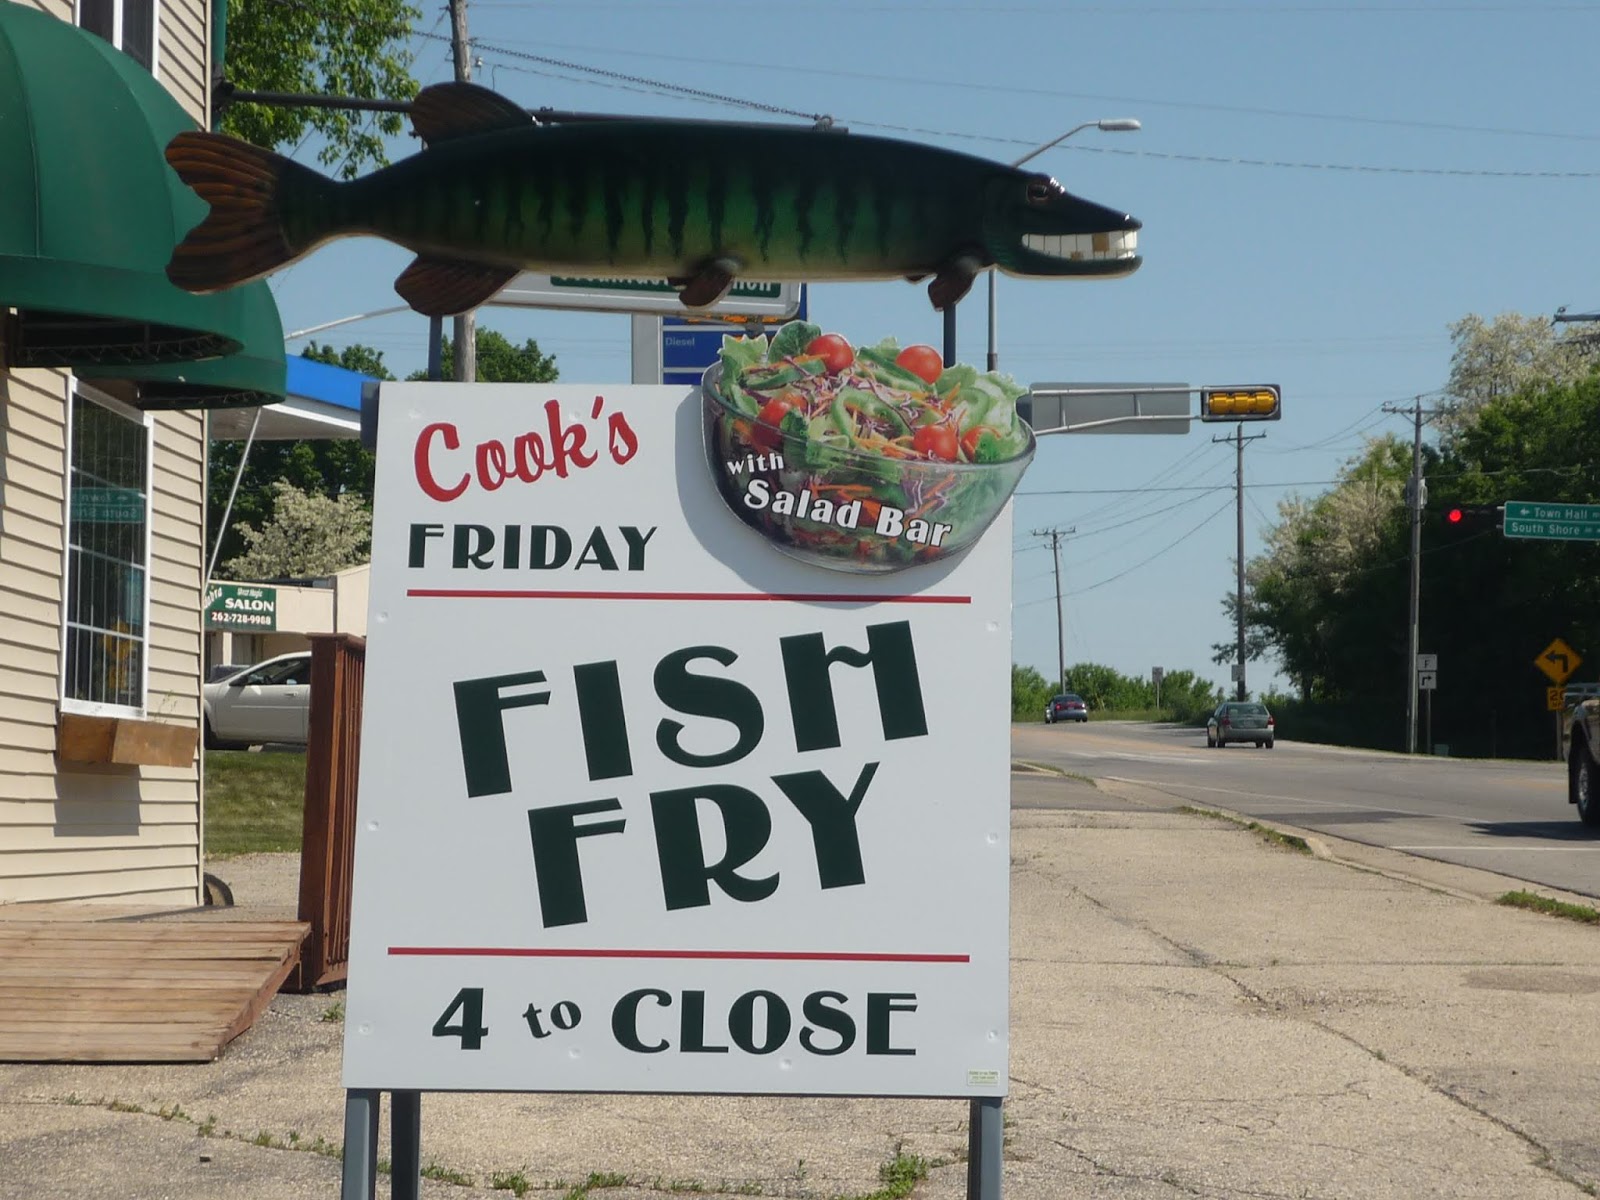 Smokin' Chokin' and Chowing with the King Friday Fish Fry